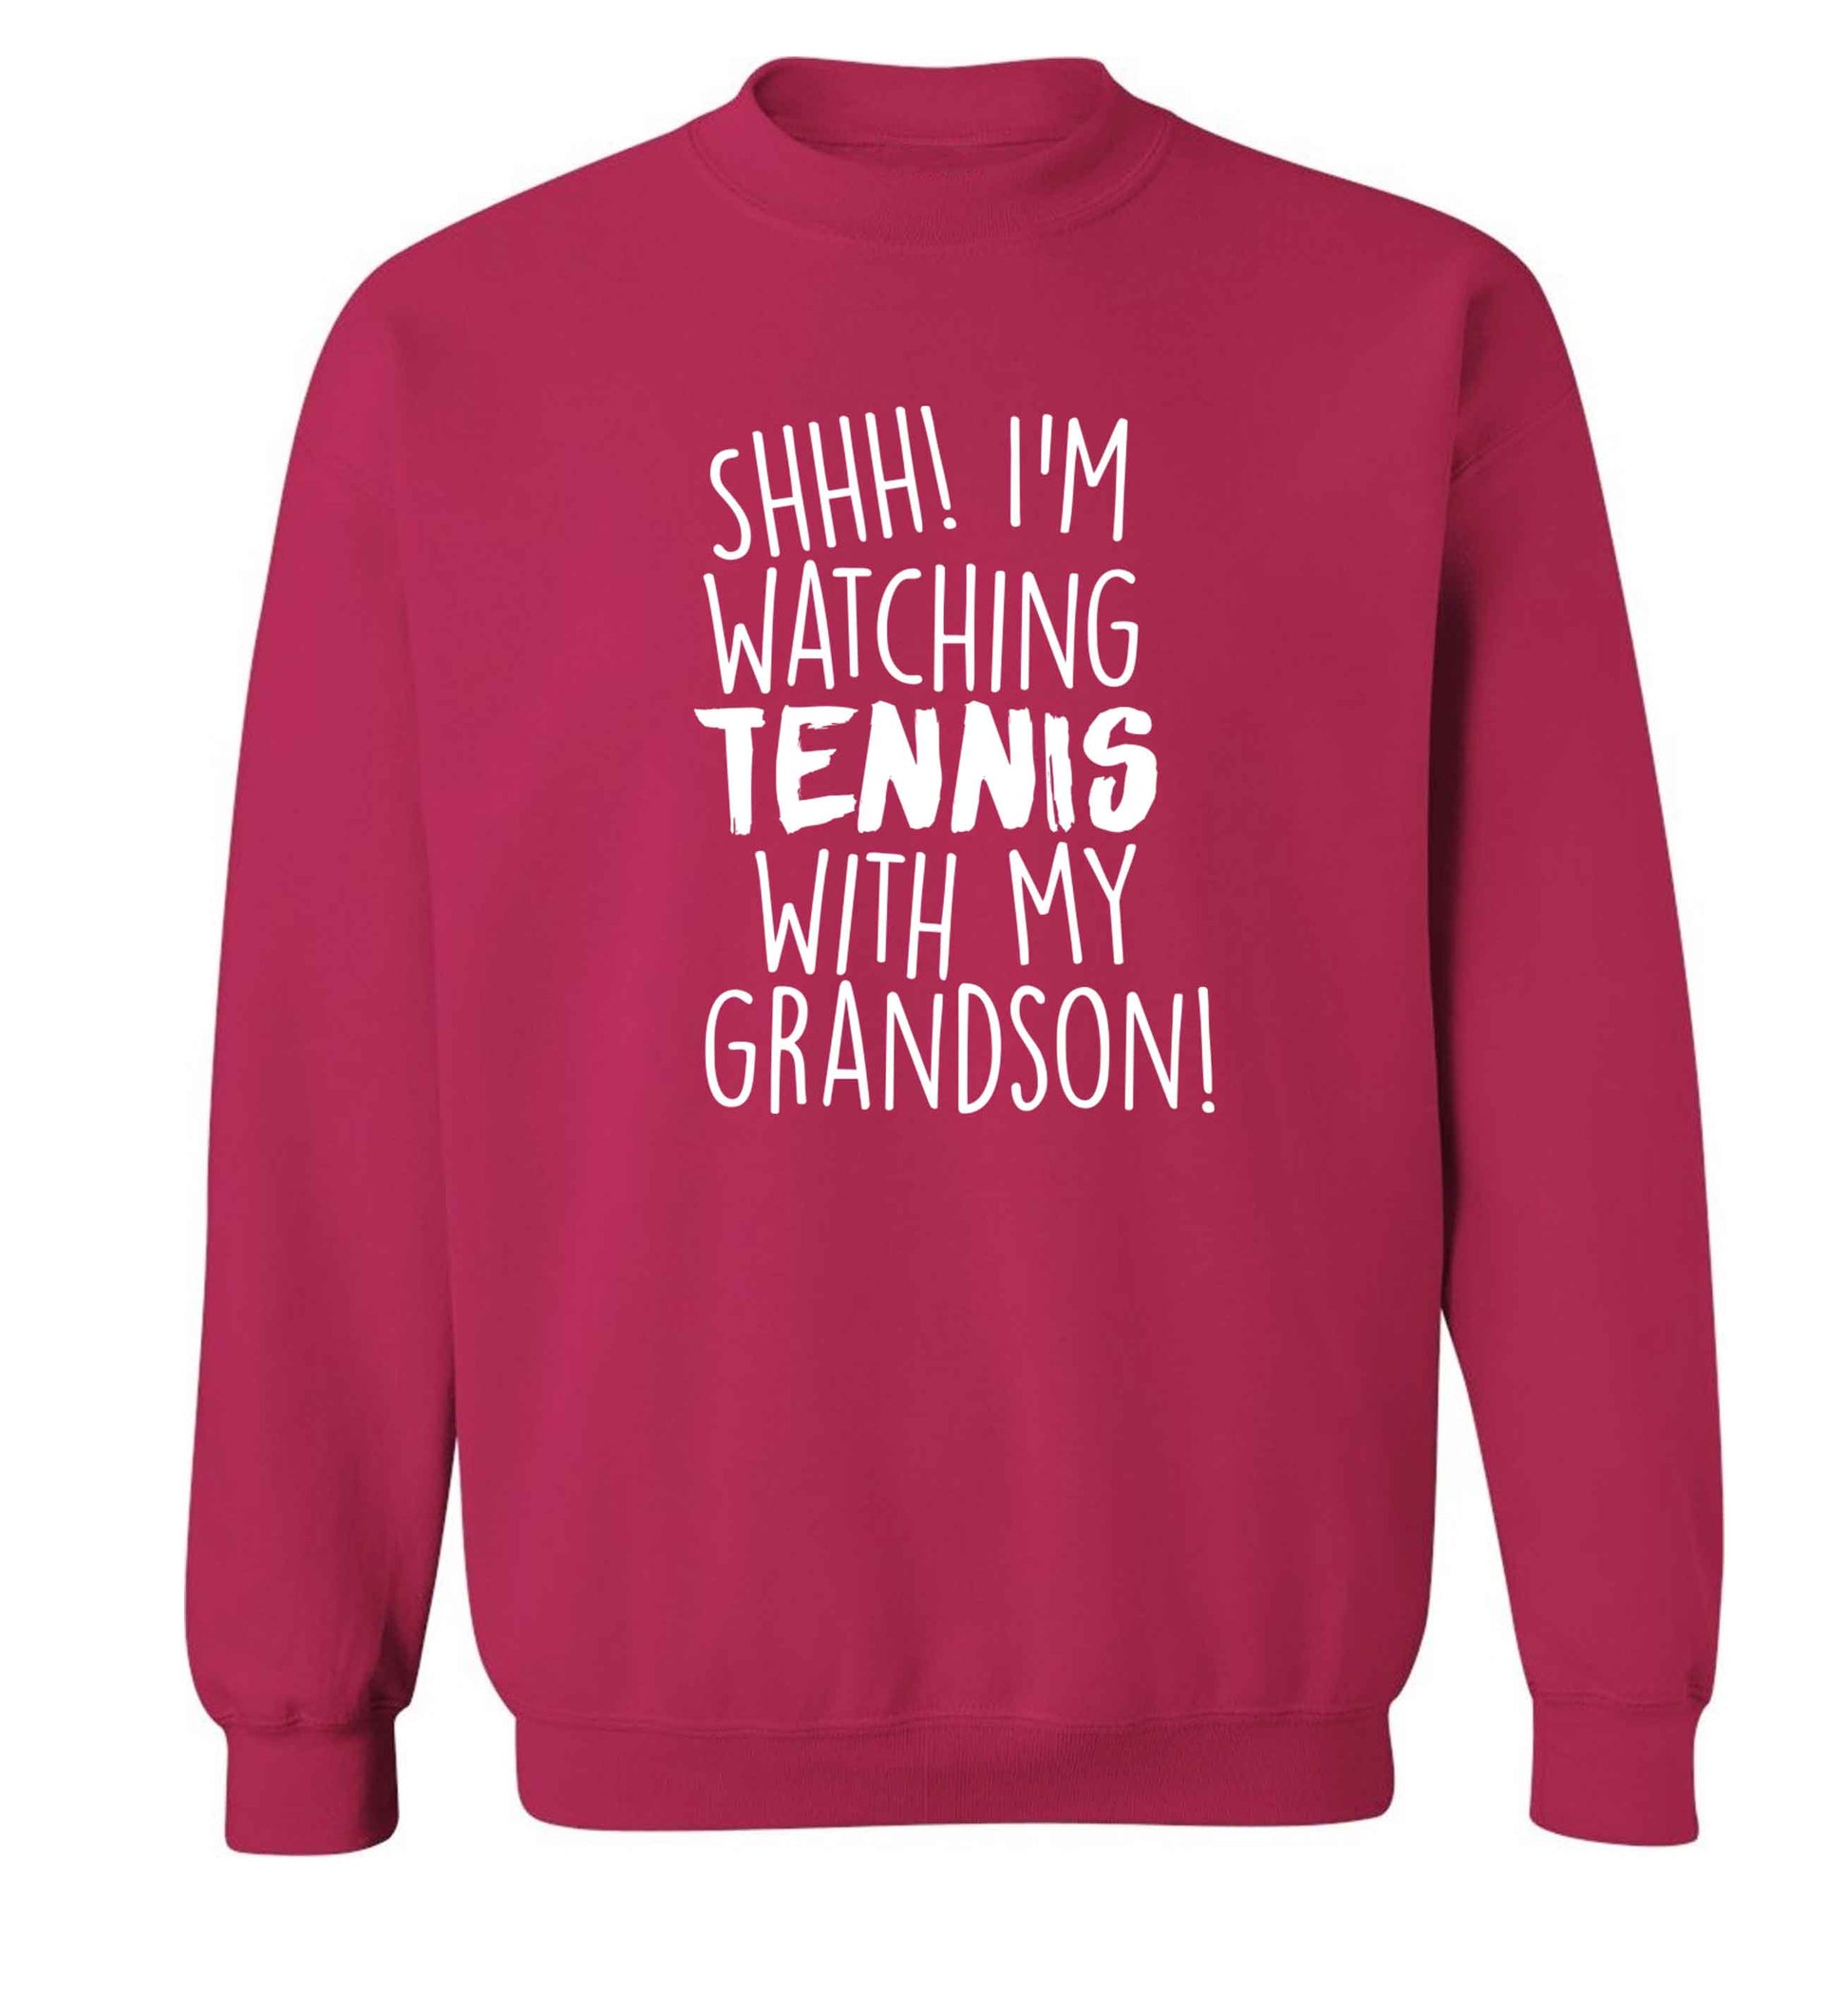 Shh! I'm watching tennis with my grandson! Adult's unisex pink Sweater 2XL